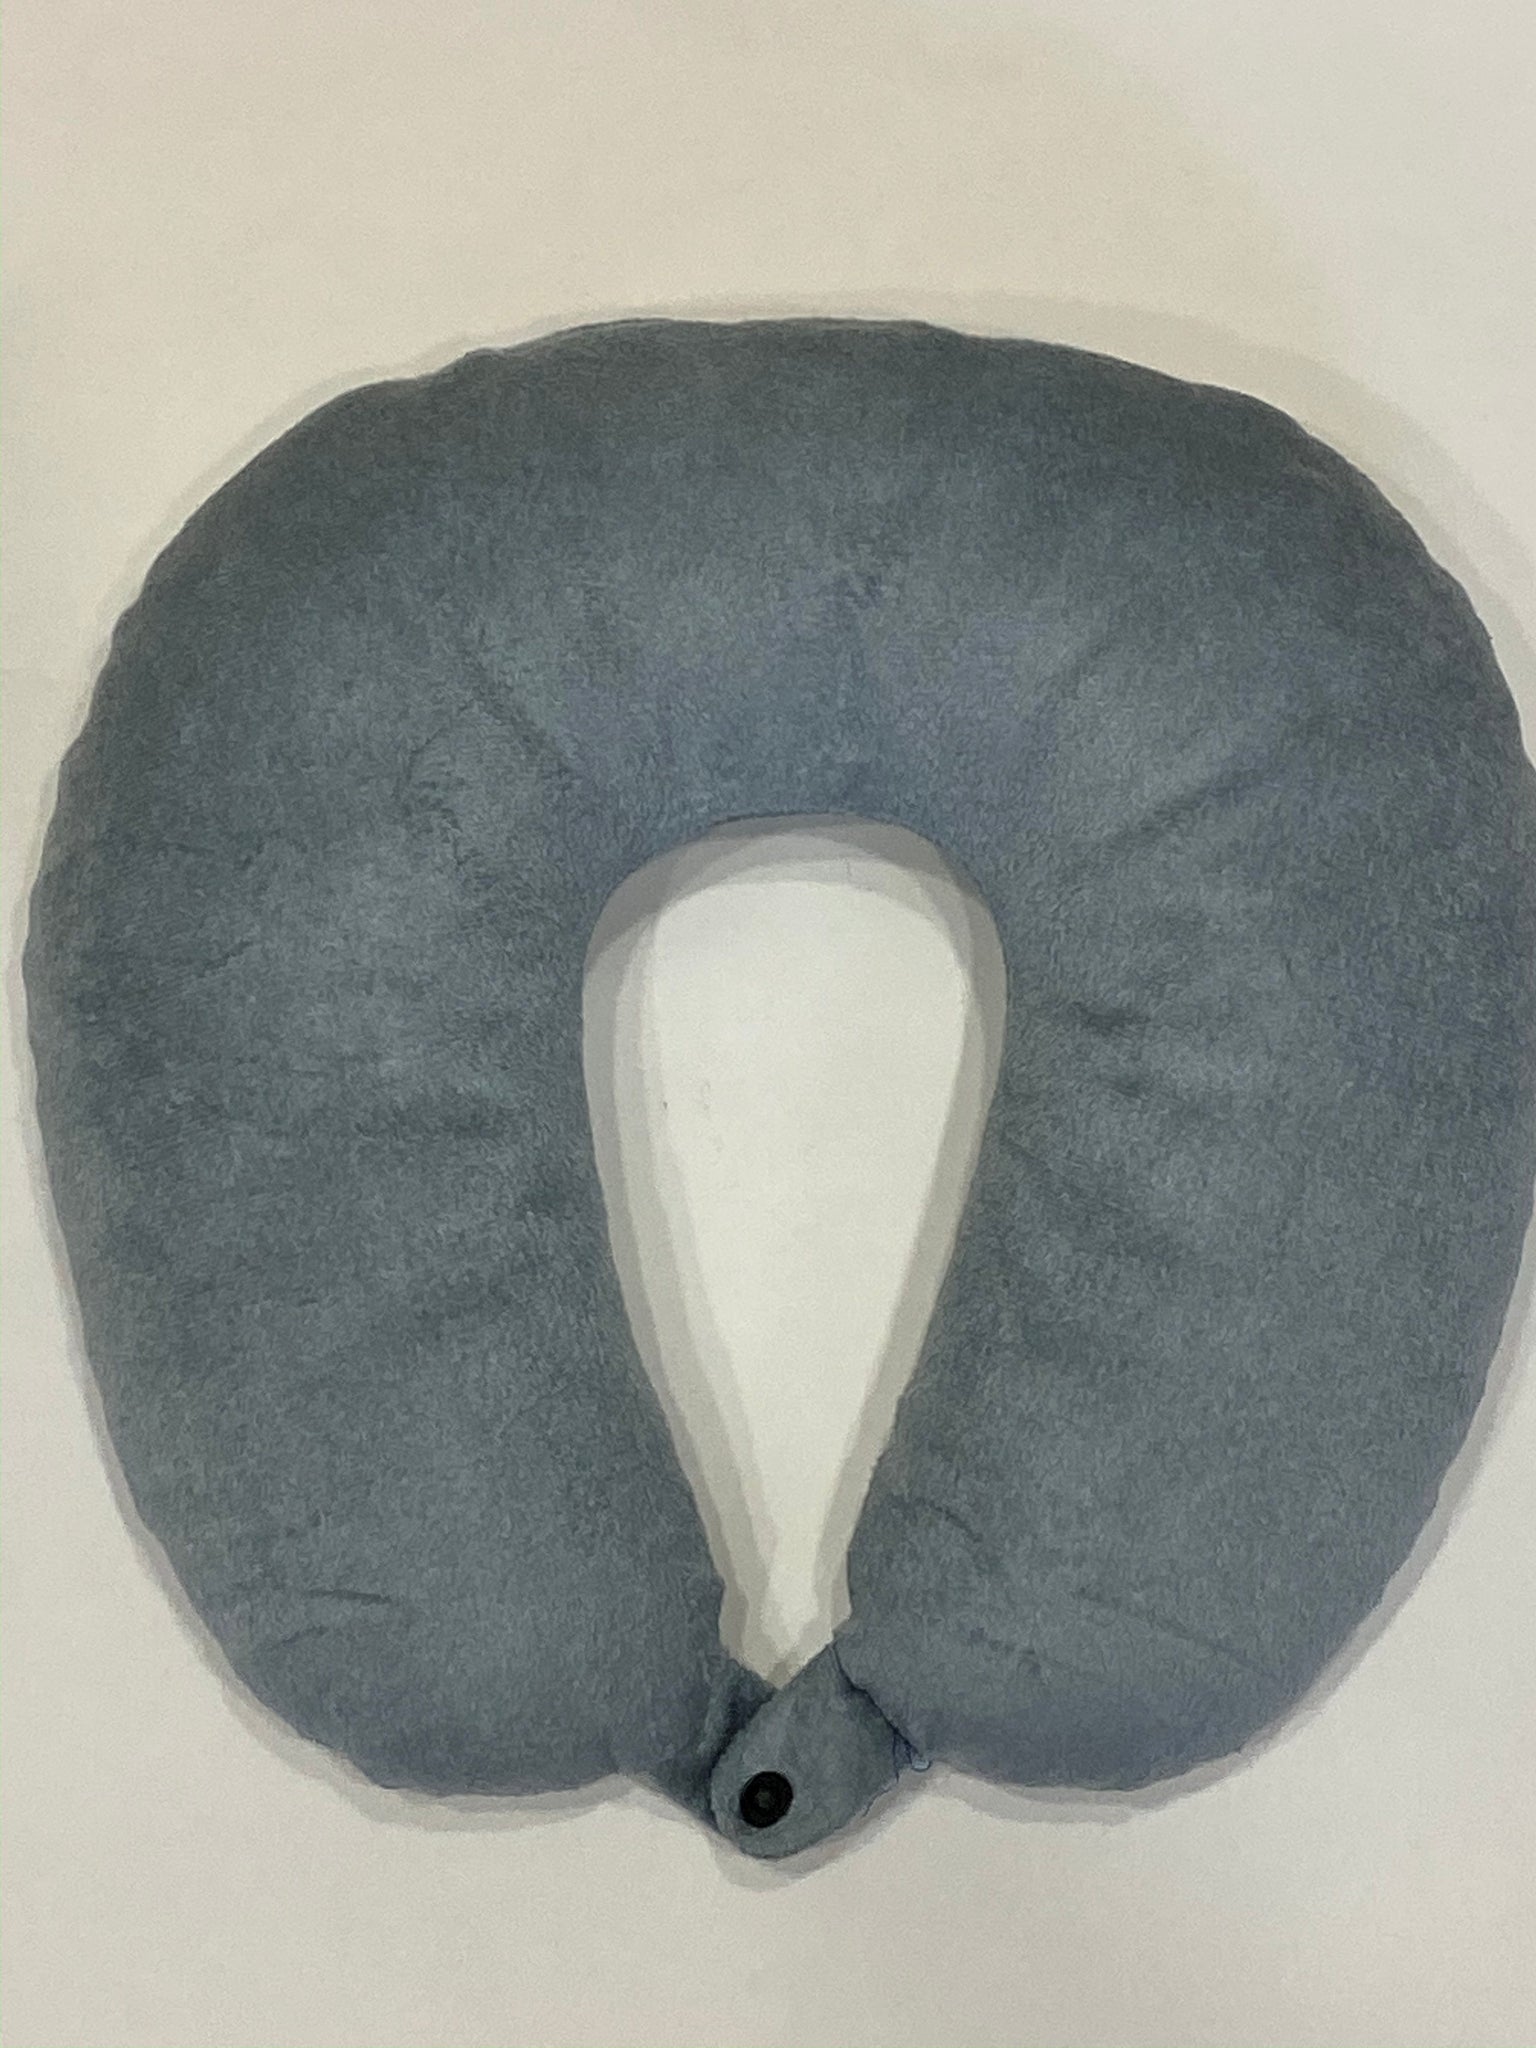 Lushomes neck pillow, Grey Travel Pillow, neck pillow for travel, For Flights, for Train, for neck pain sleeping, with Polyester filling  (12 x 12 inches, Singe pc)